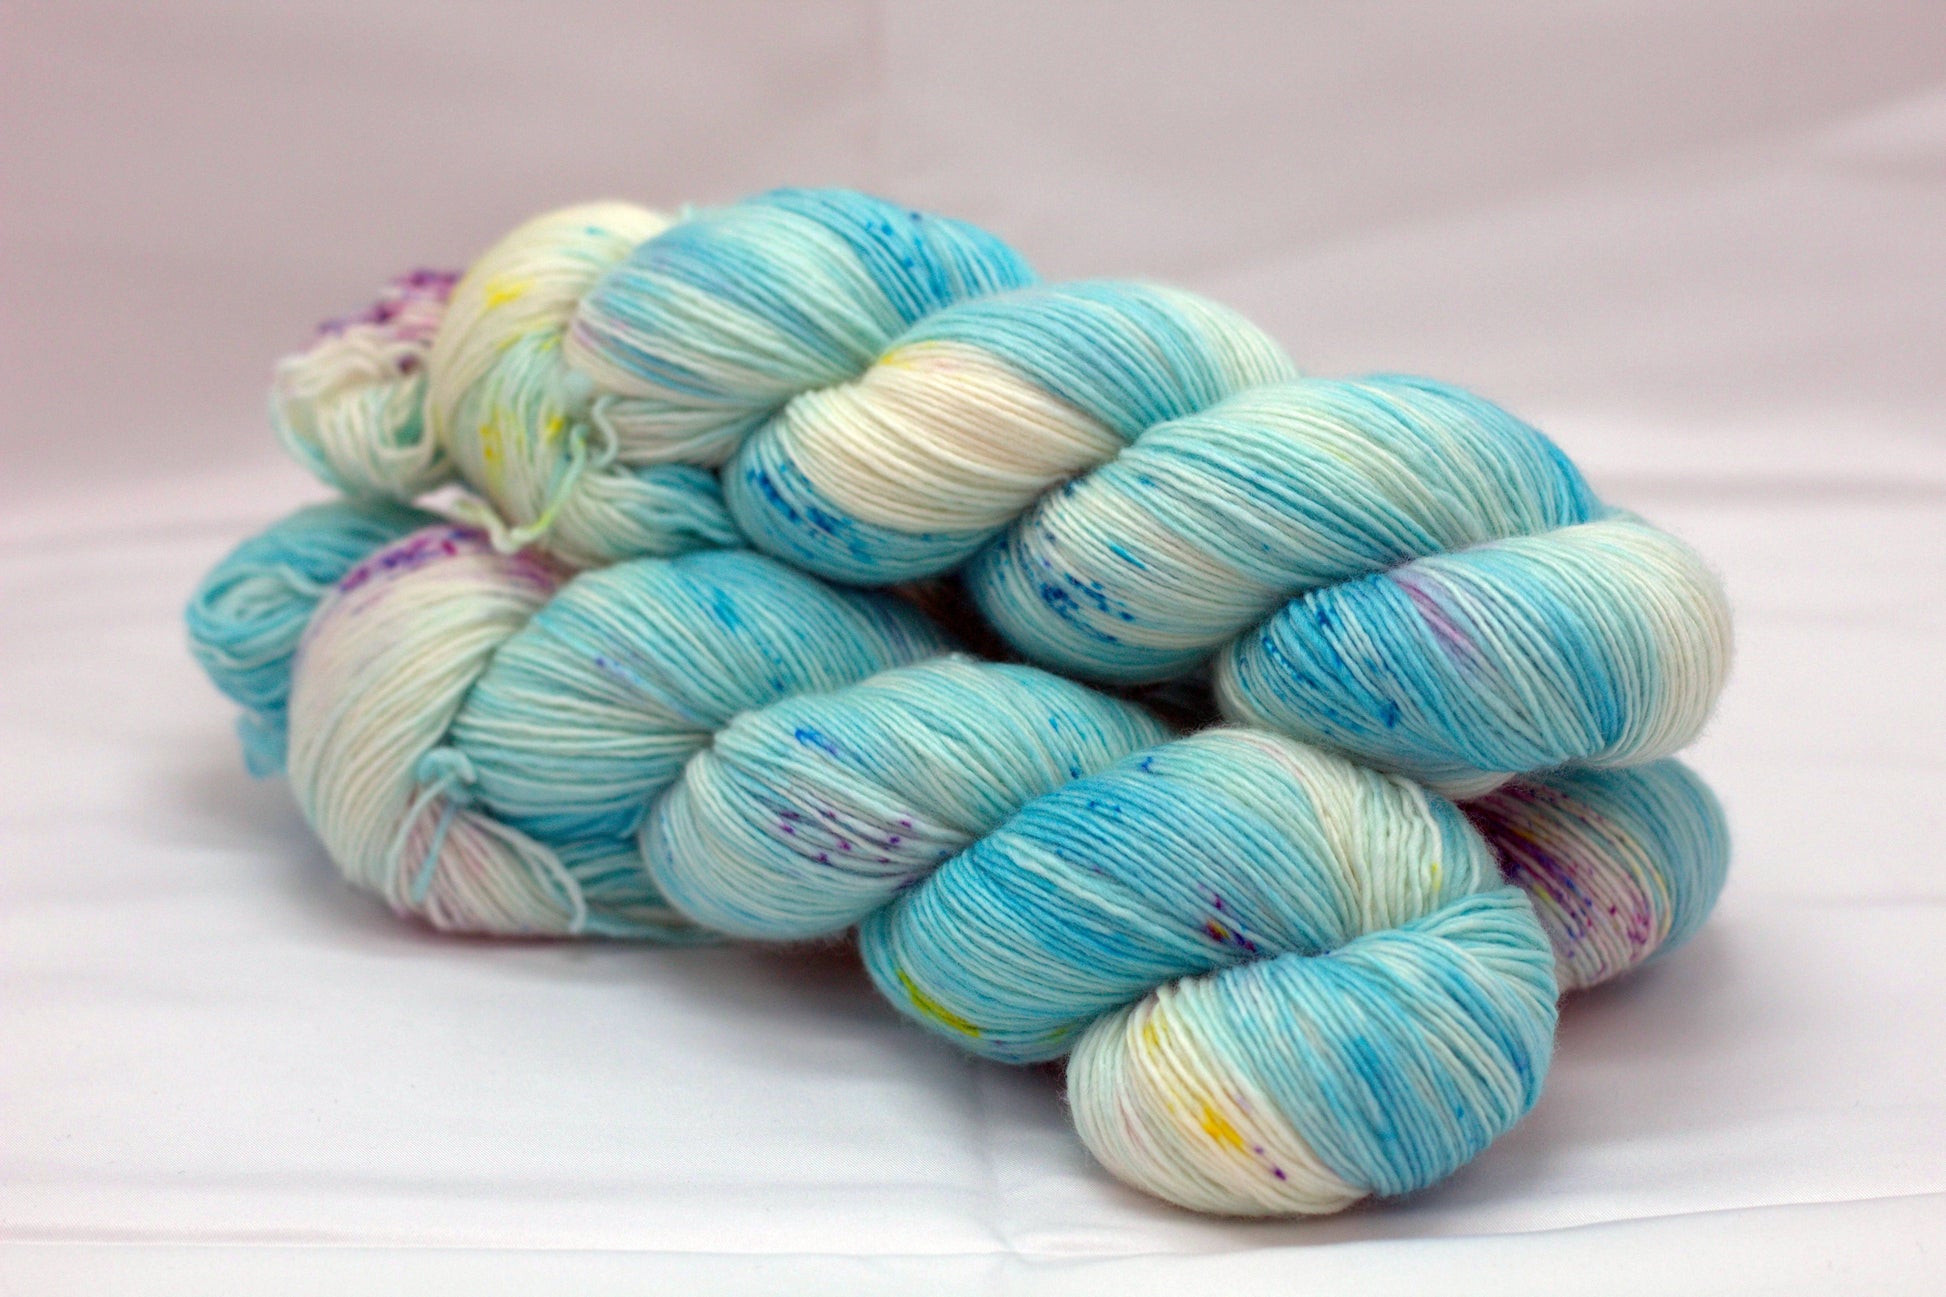 Side view of three twisted skeins variegated turquoise and white yarn with yellow and purple speckles on white background.